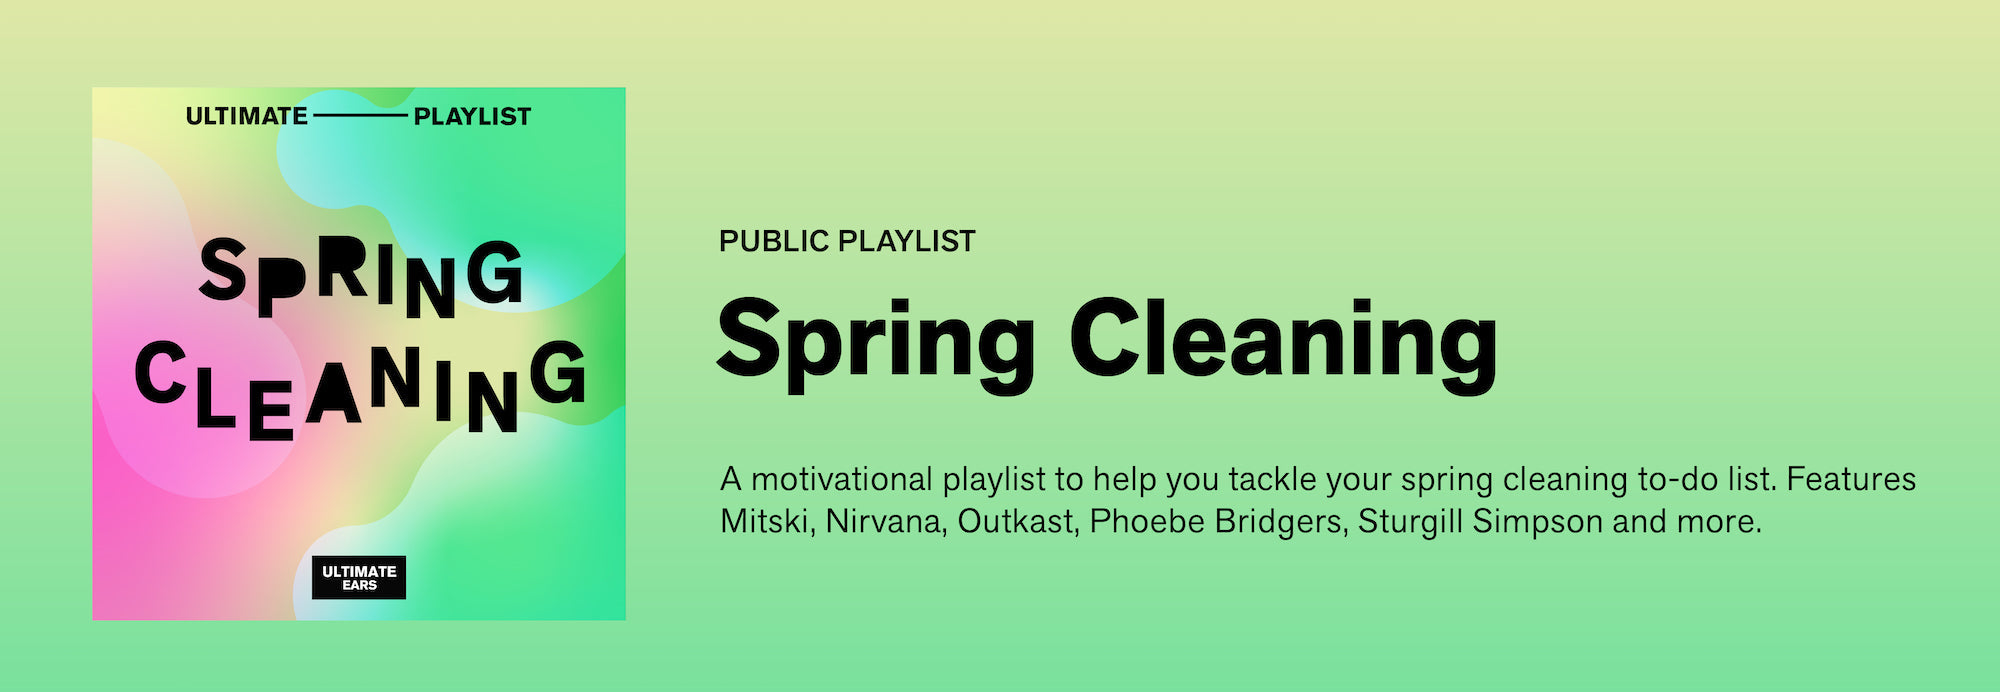 Playlist: Spring Cleaning